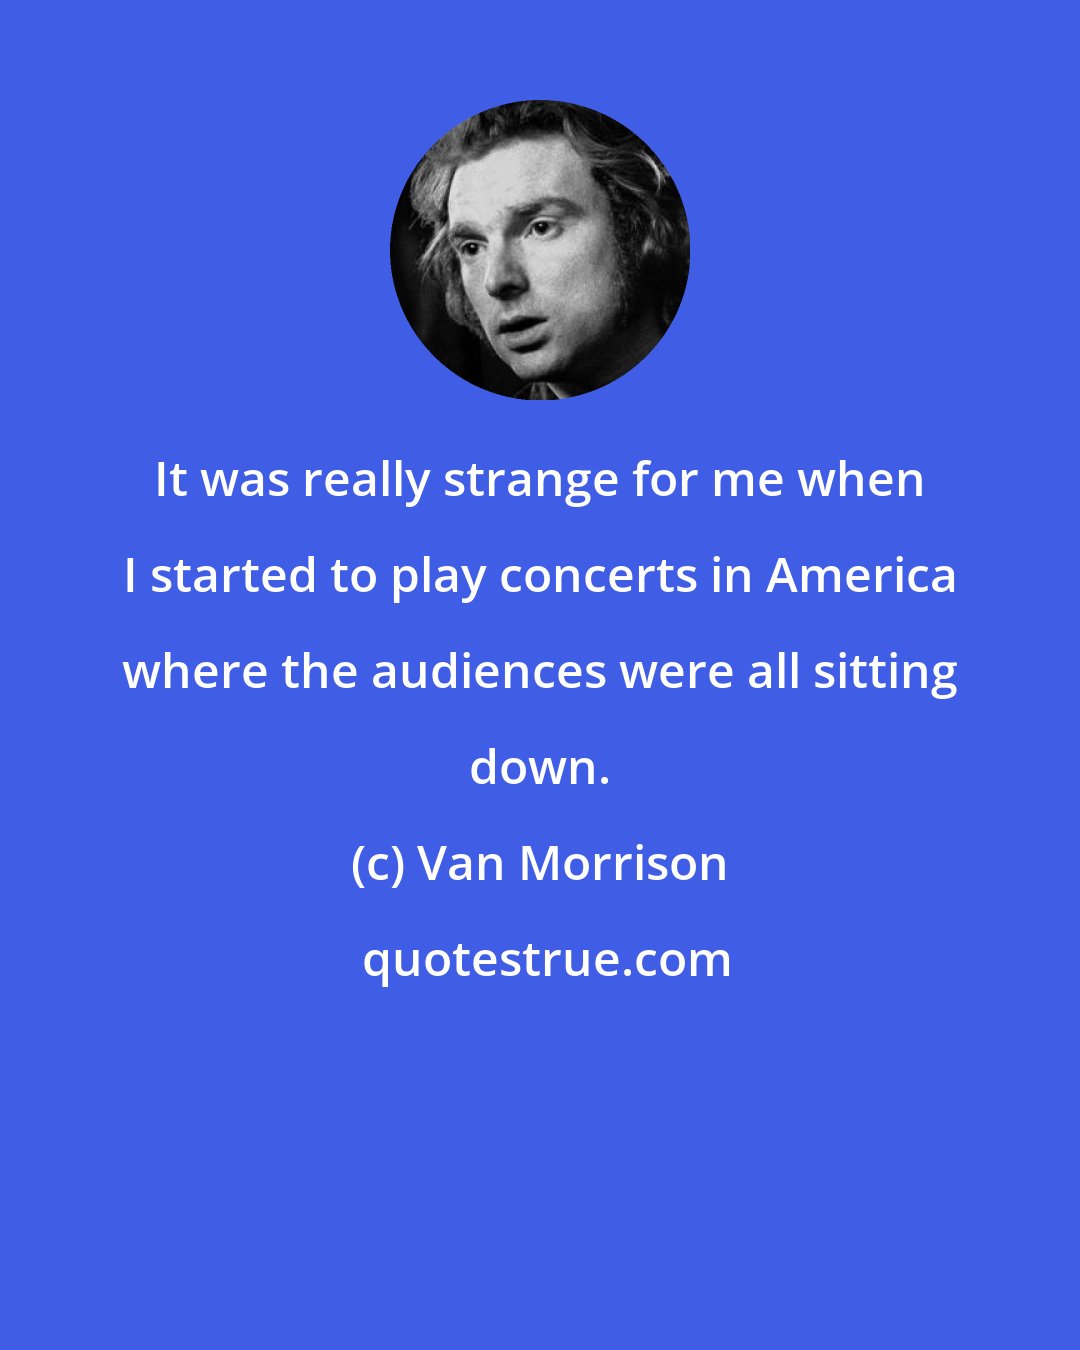 Van Morrison: It was really strange for me when I started to play concerts in America where the audiences were all sitting down.